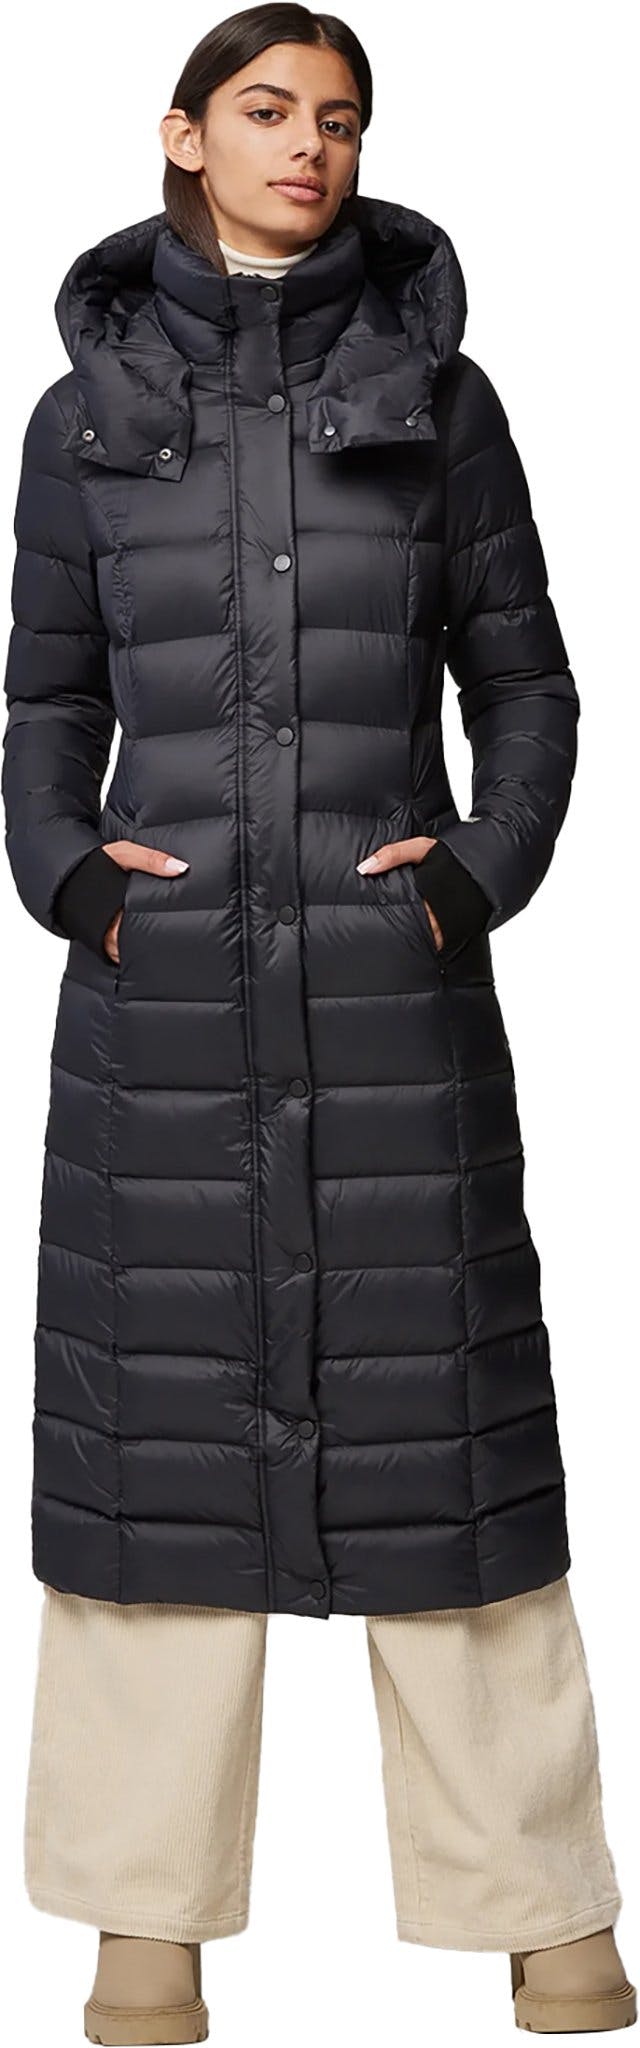 Product image for Ivana-N Sustainable Calf-Length Lightweight Down Coat with Hood - Women's